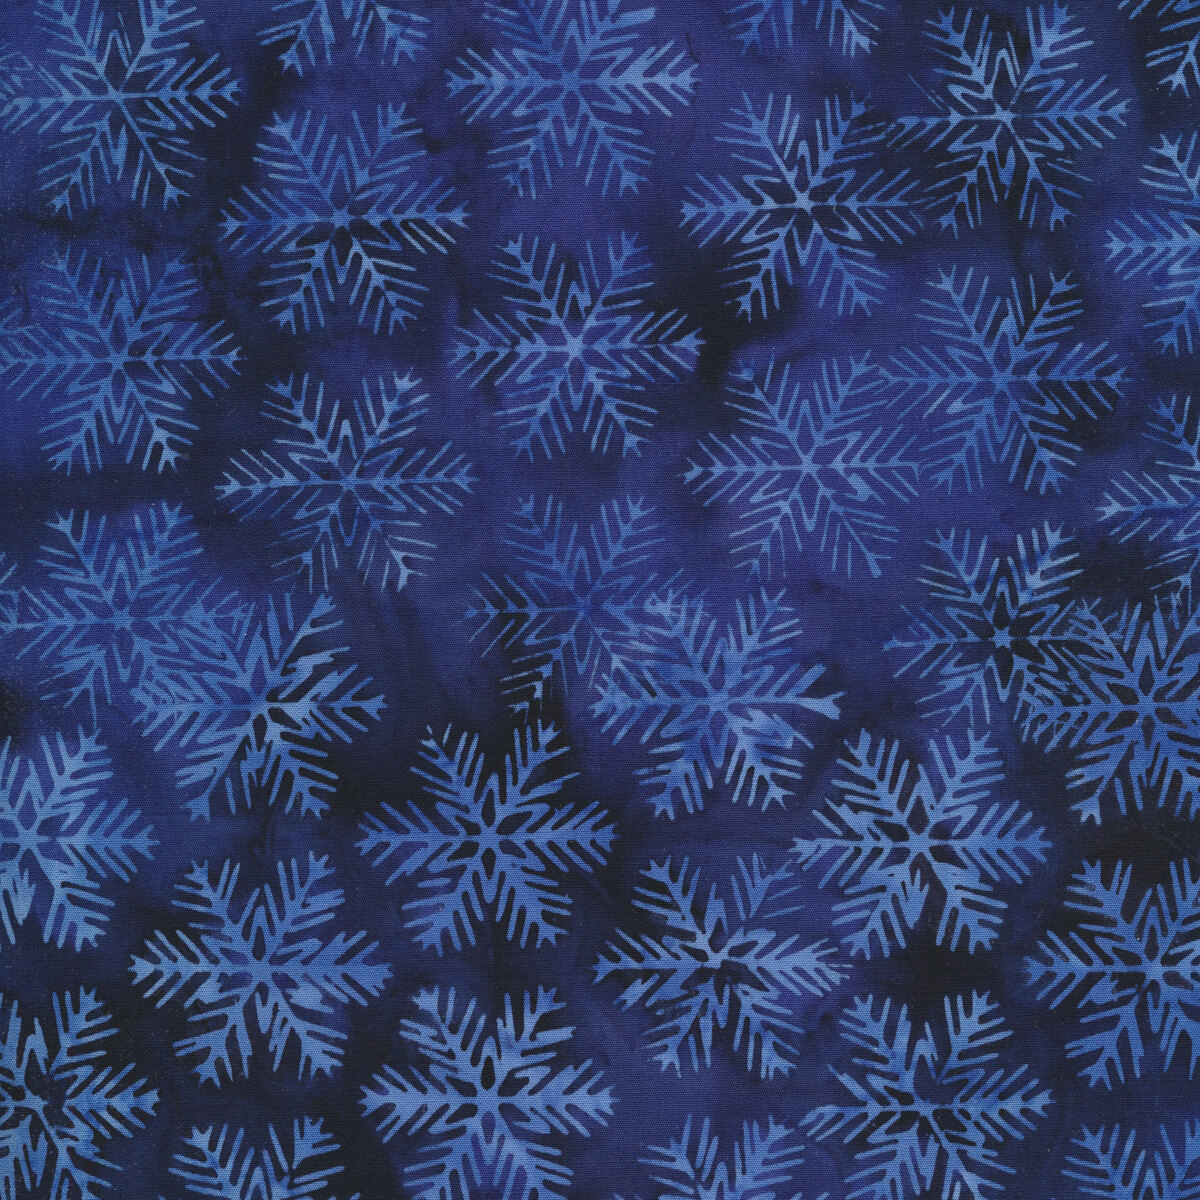 Felt Snowflakes With Snow On Blue Stock Photo - Download Image Now